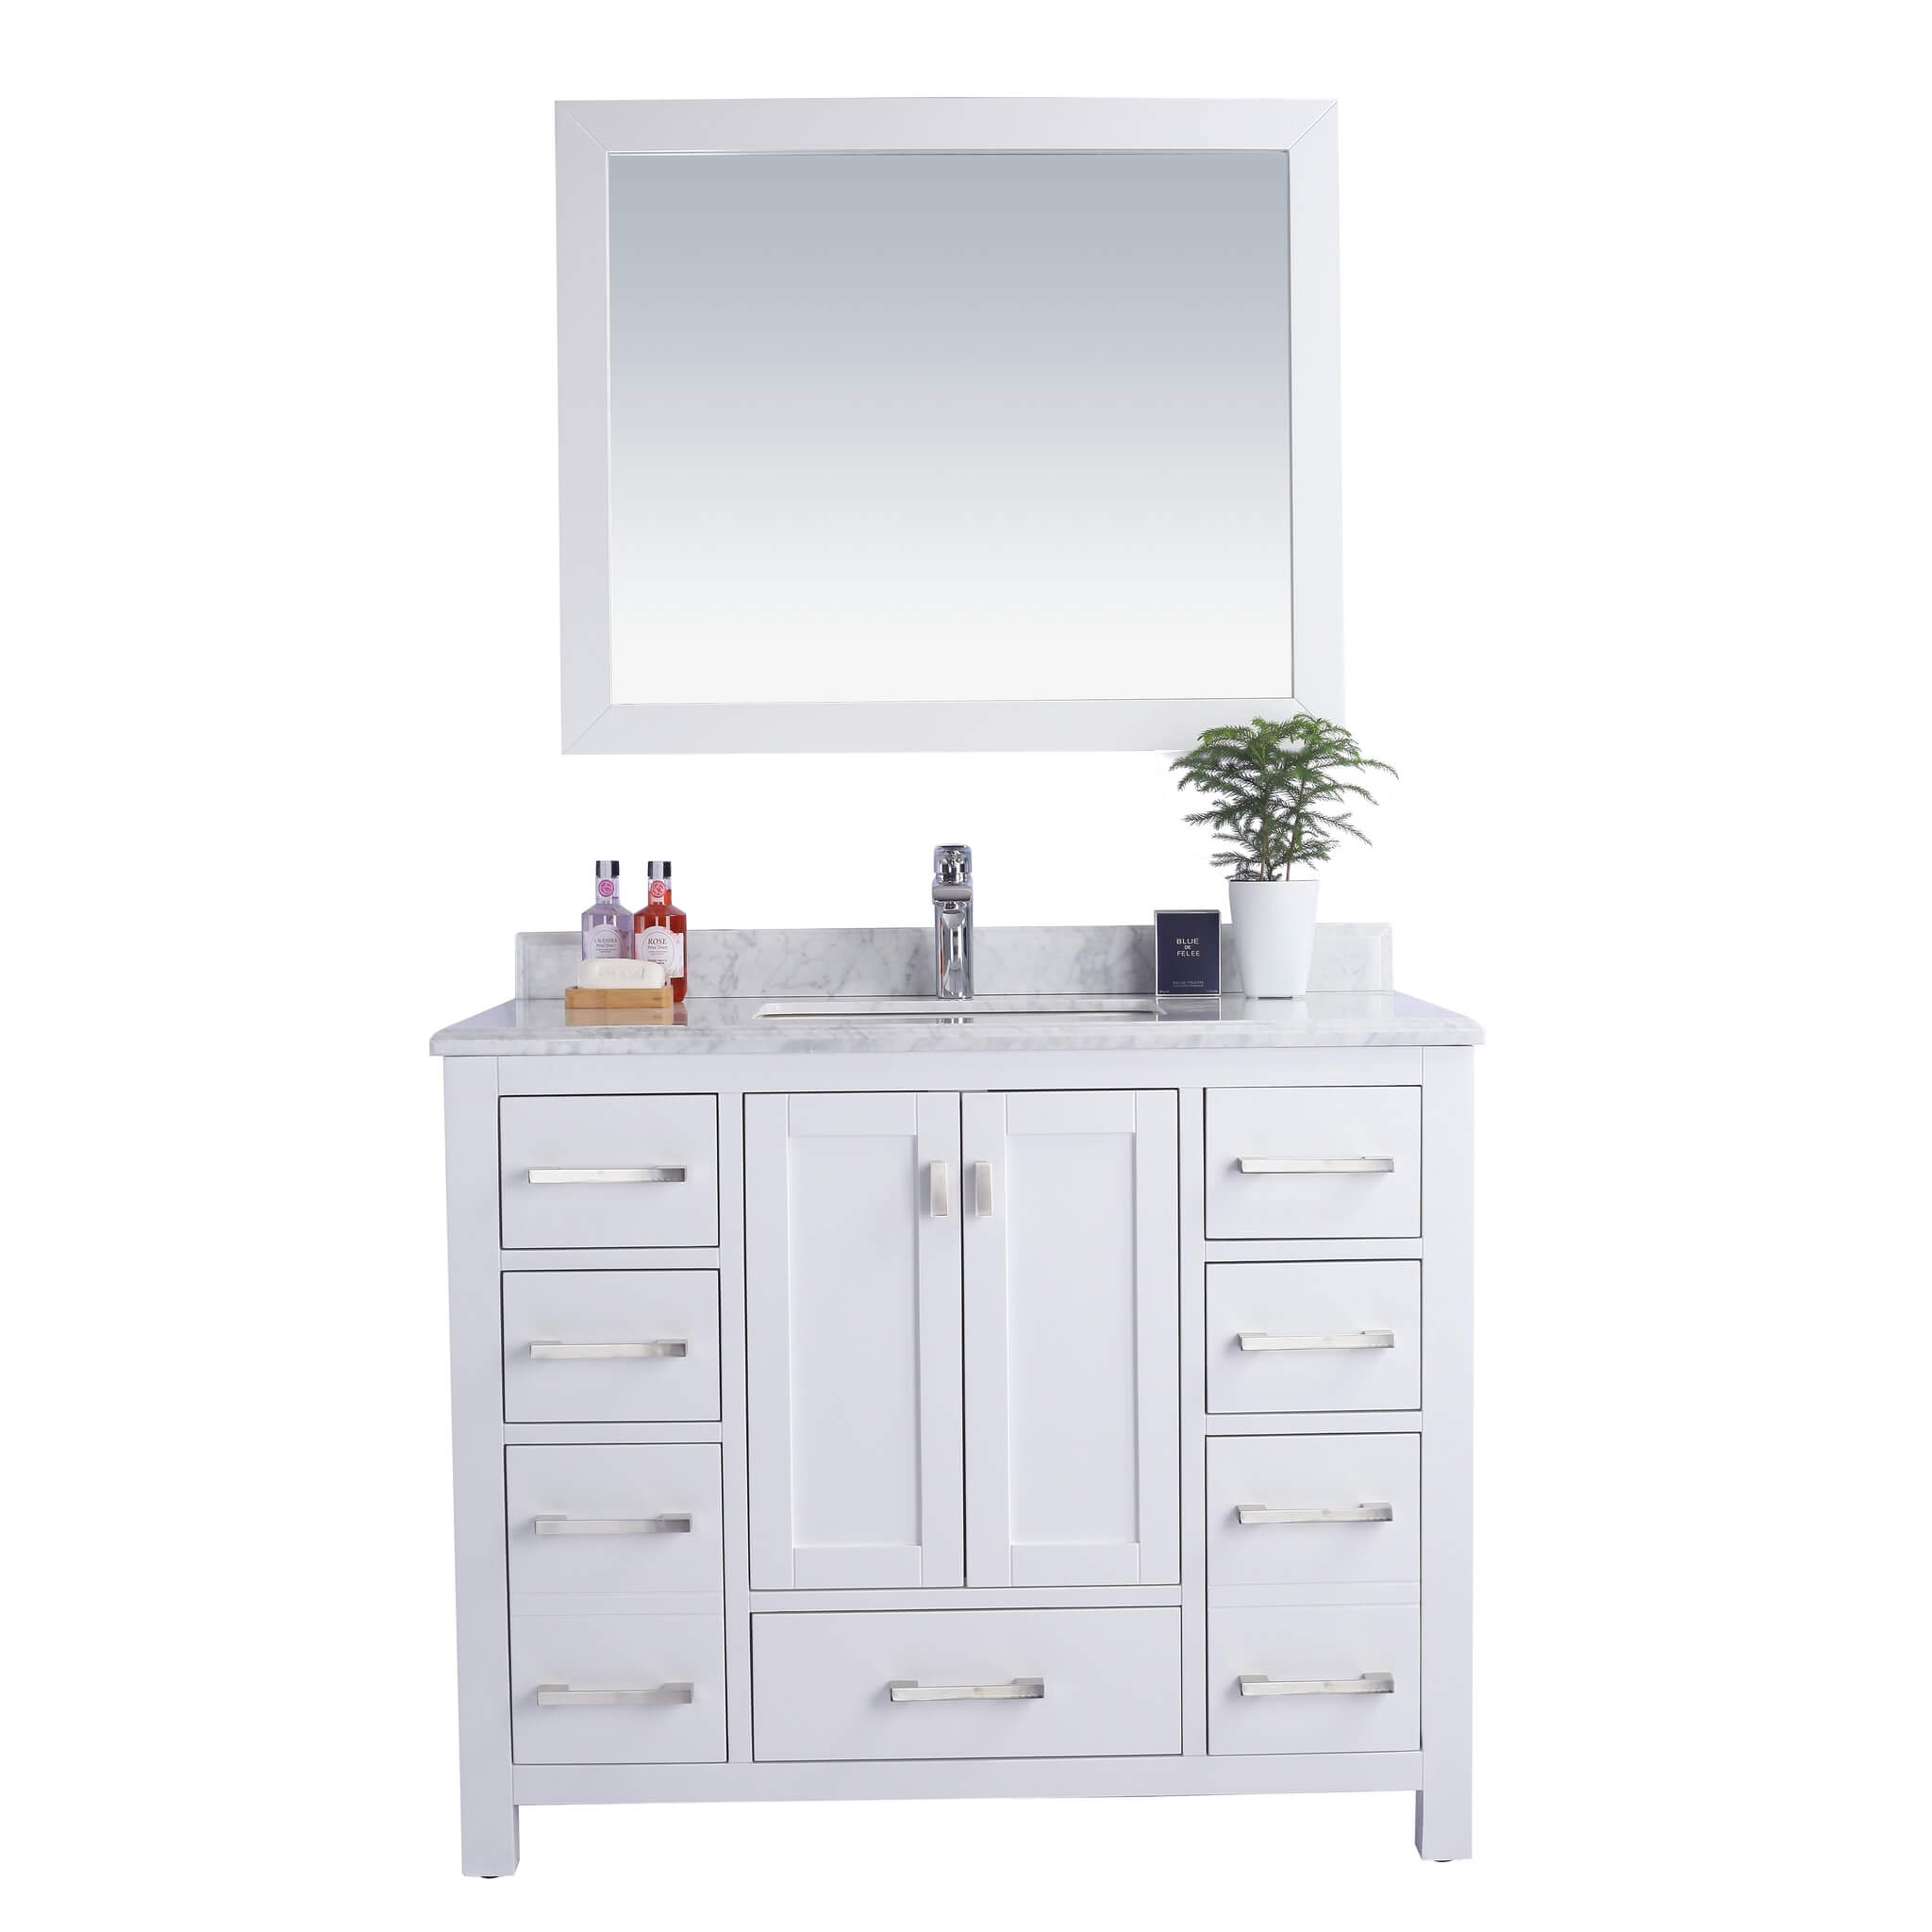 LAVIVA Wilson 313ANG-42W-WC 42" Single Bathroom Vanity in White with White Carrara Marble, White Rectangle Sink, Front View